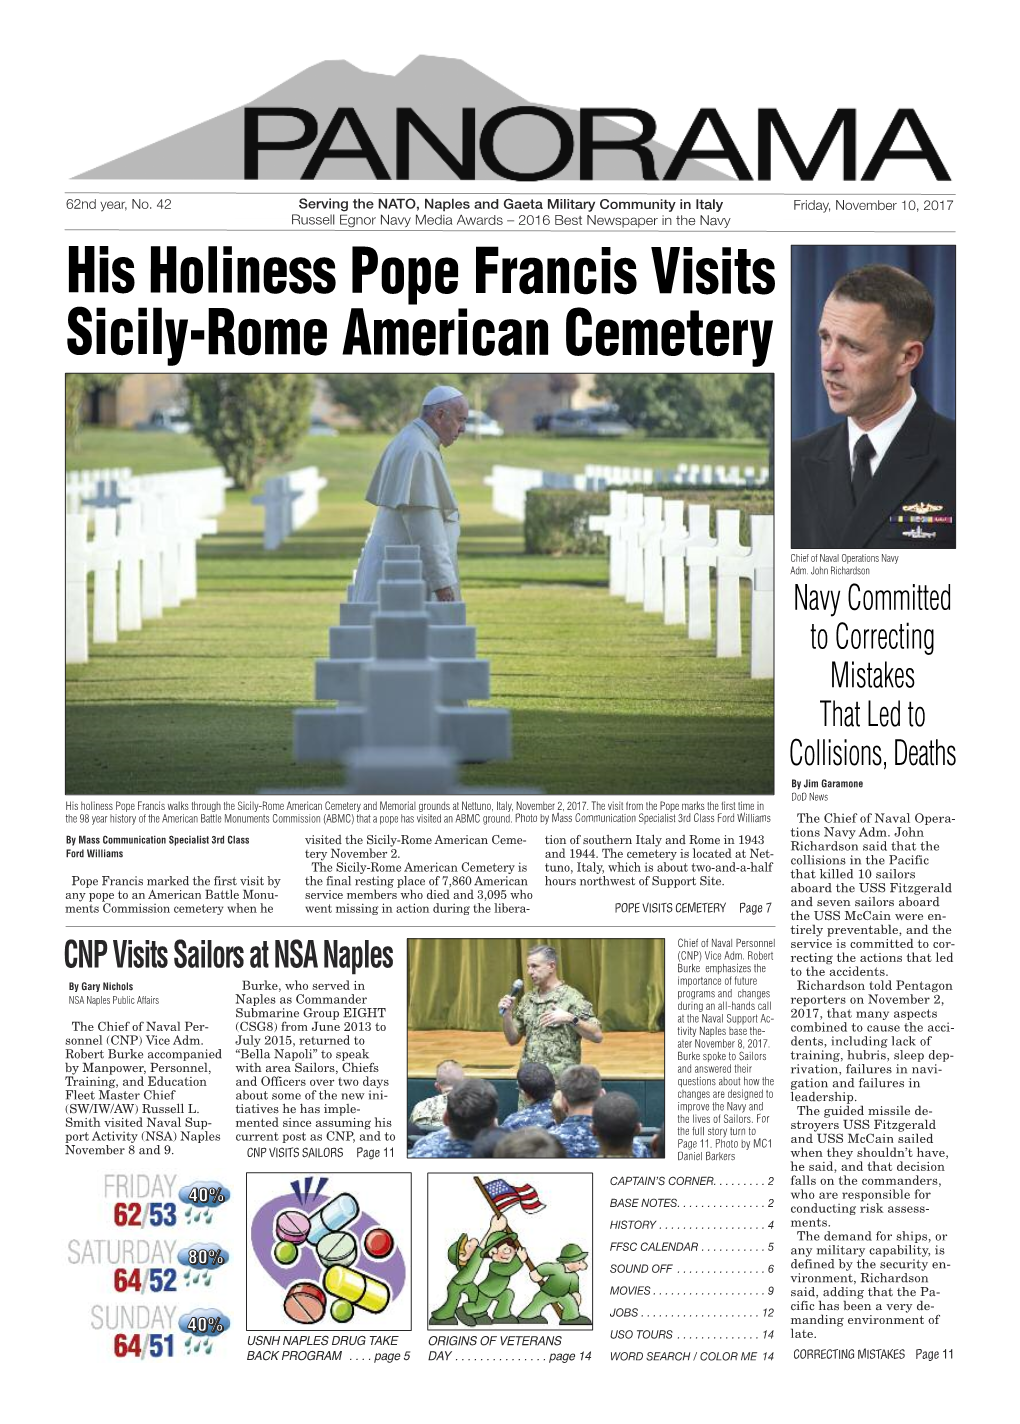 His Holiness Pope Francis Visits Sicily-Rome American Cemetery